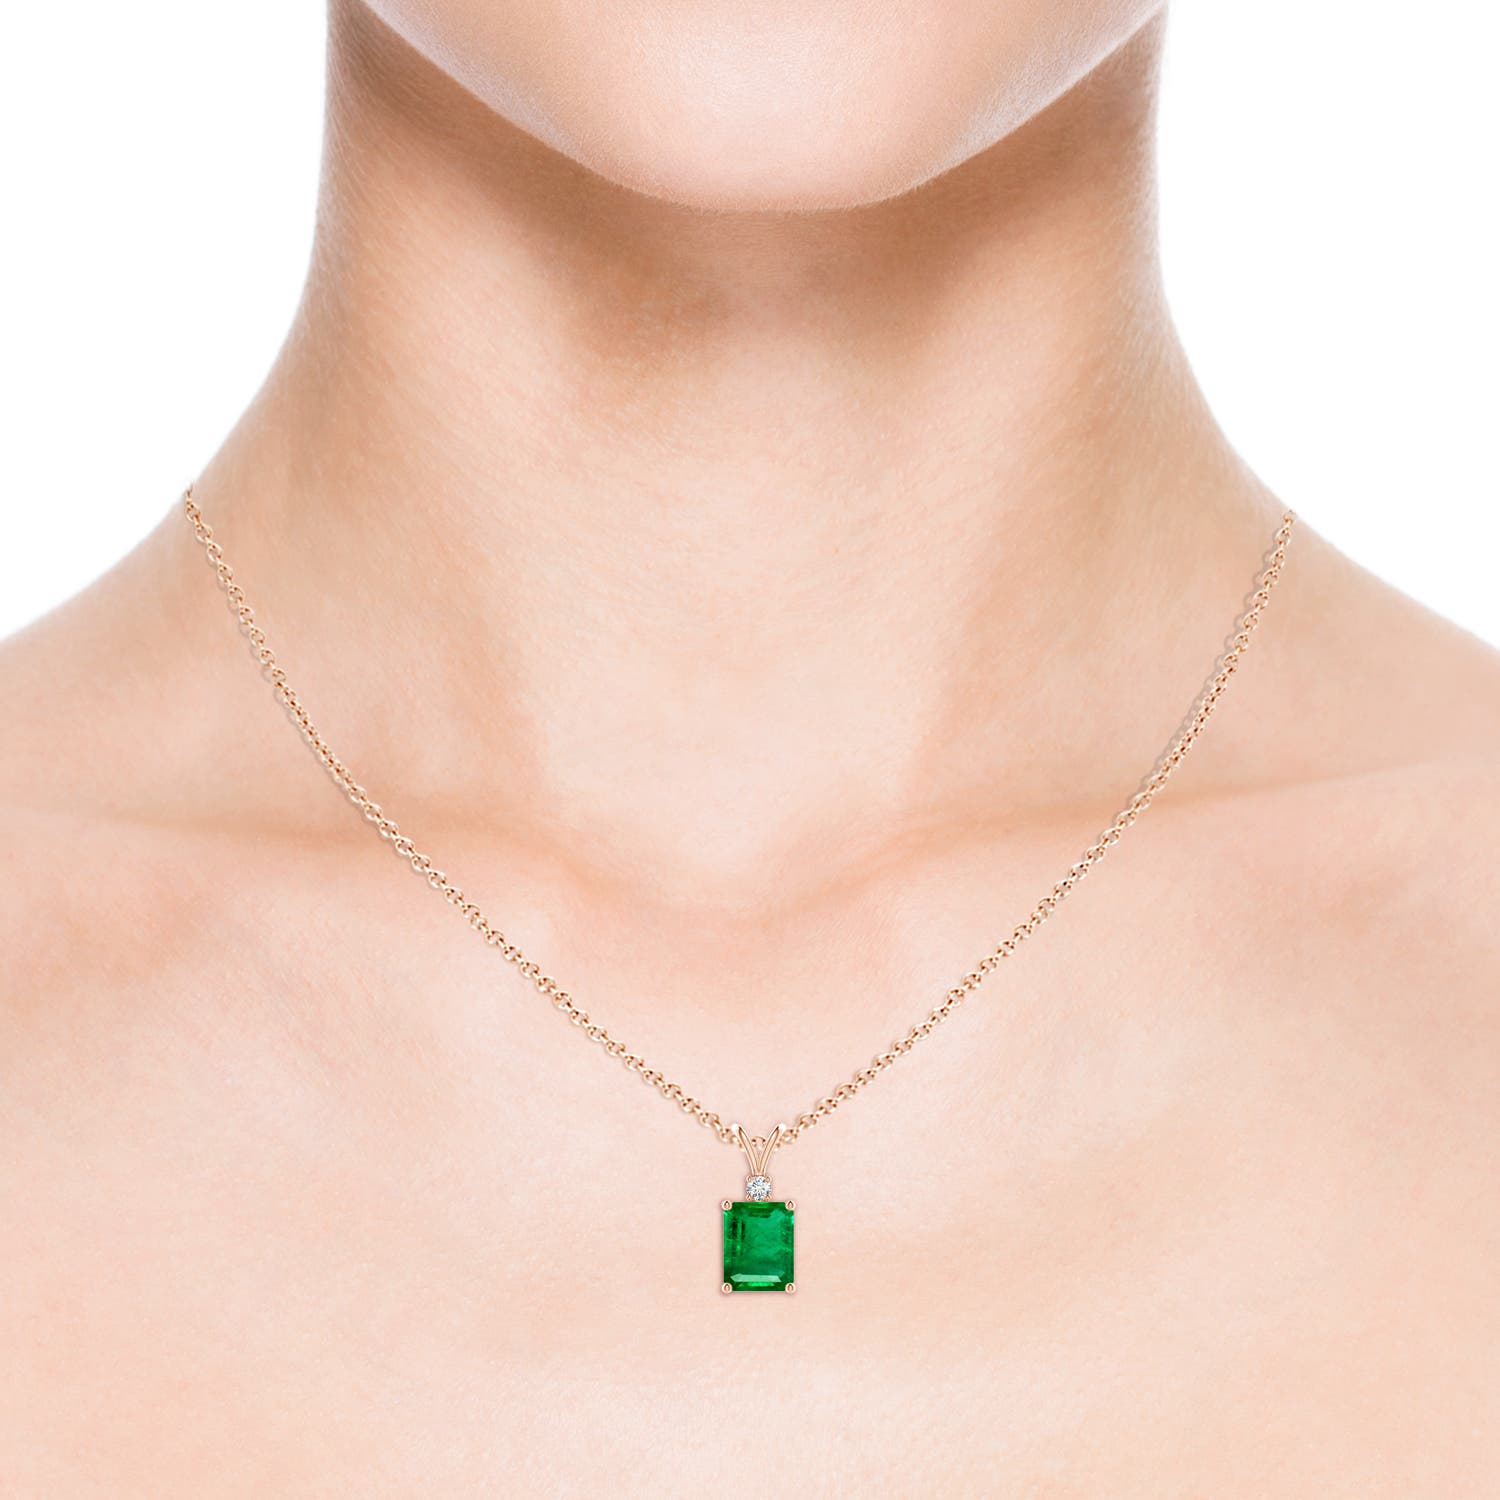 AAA - Emerald / 2.32 CT / 14 KT Rose Gold